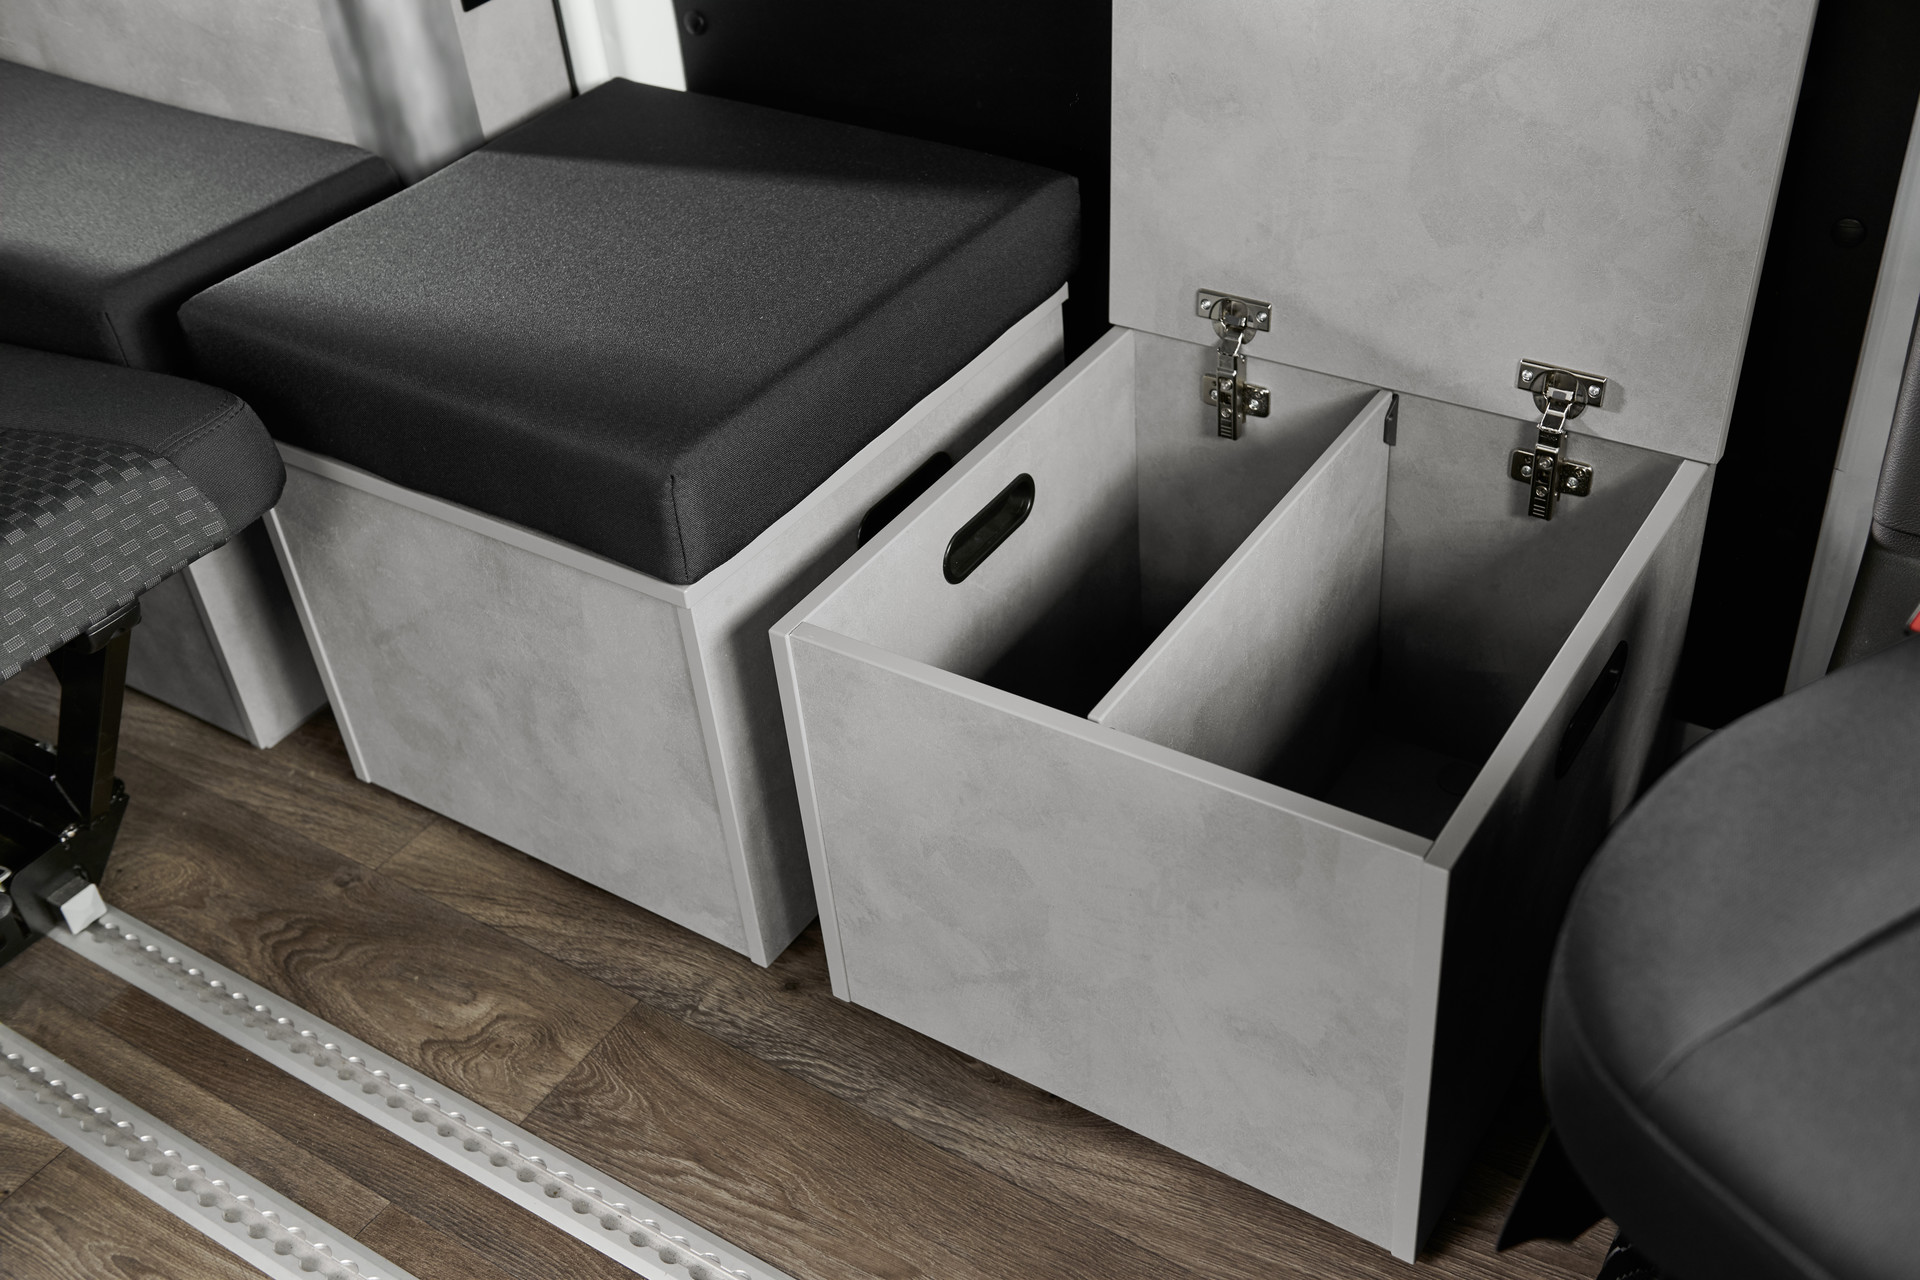 Two storage boxes attached with knurled screws offer plenty of space for everything that has to be easily accessible and can also be used as stools outside of the vehicle.